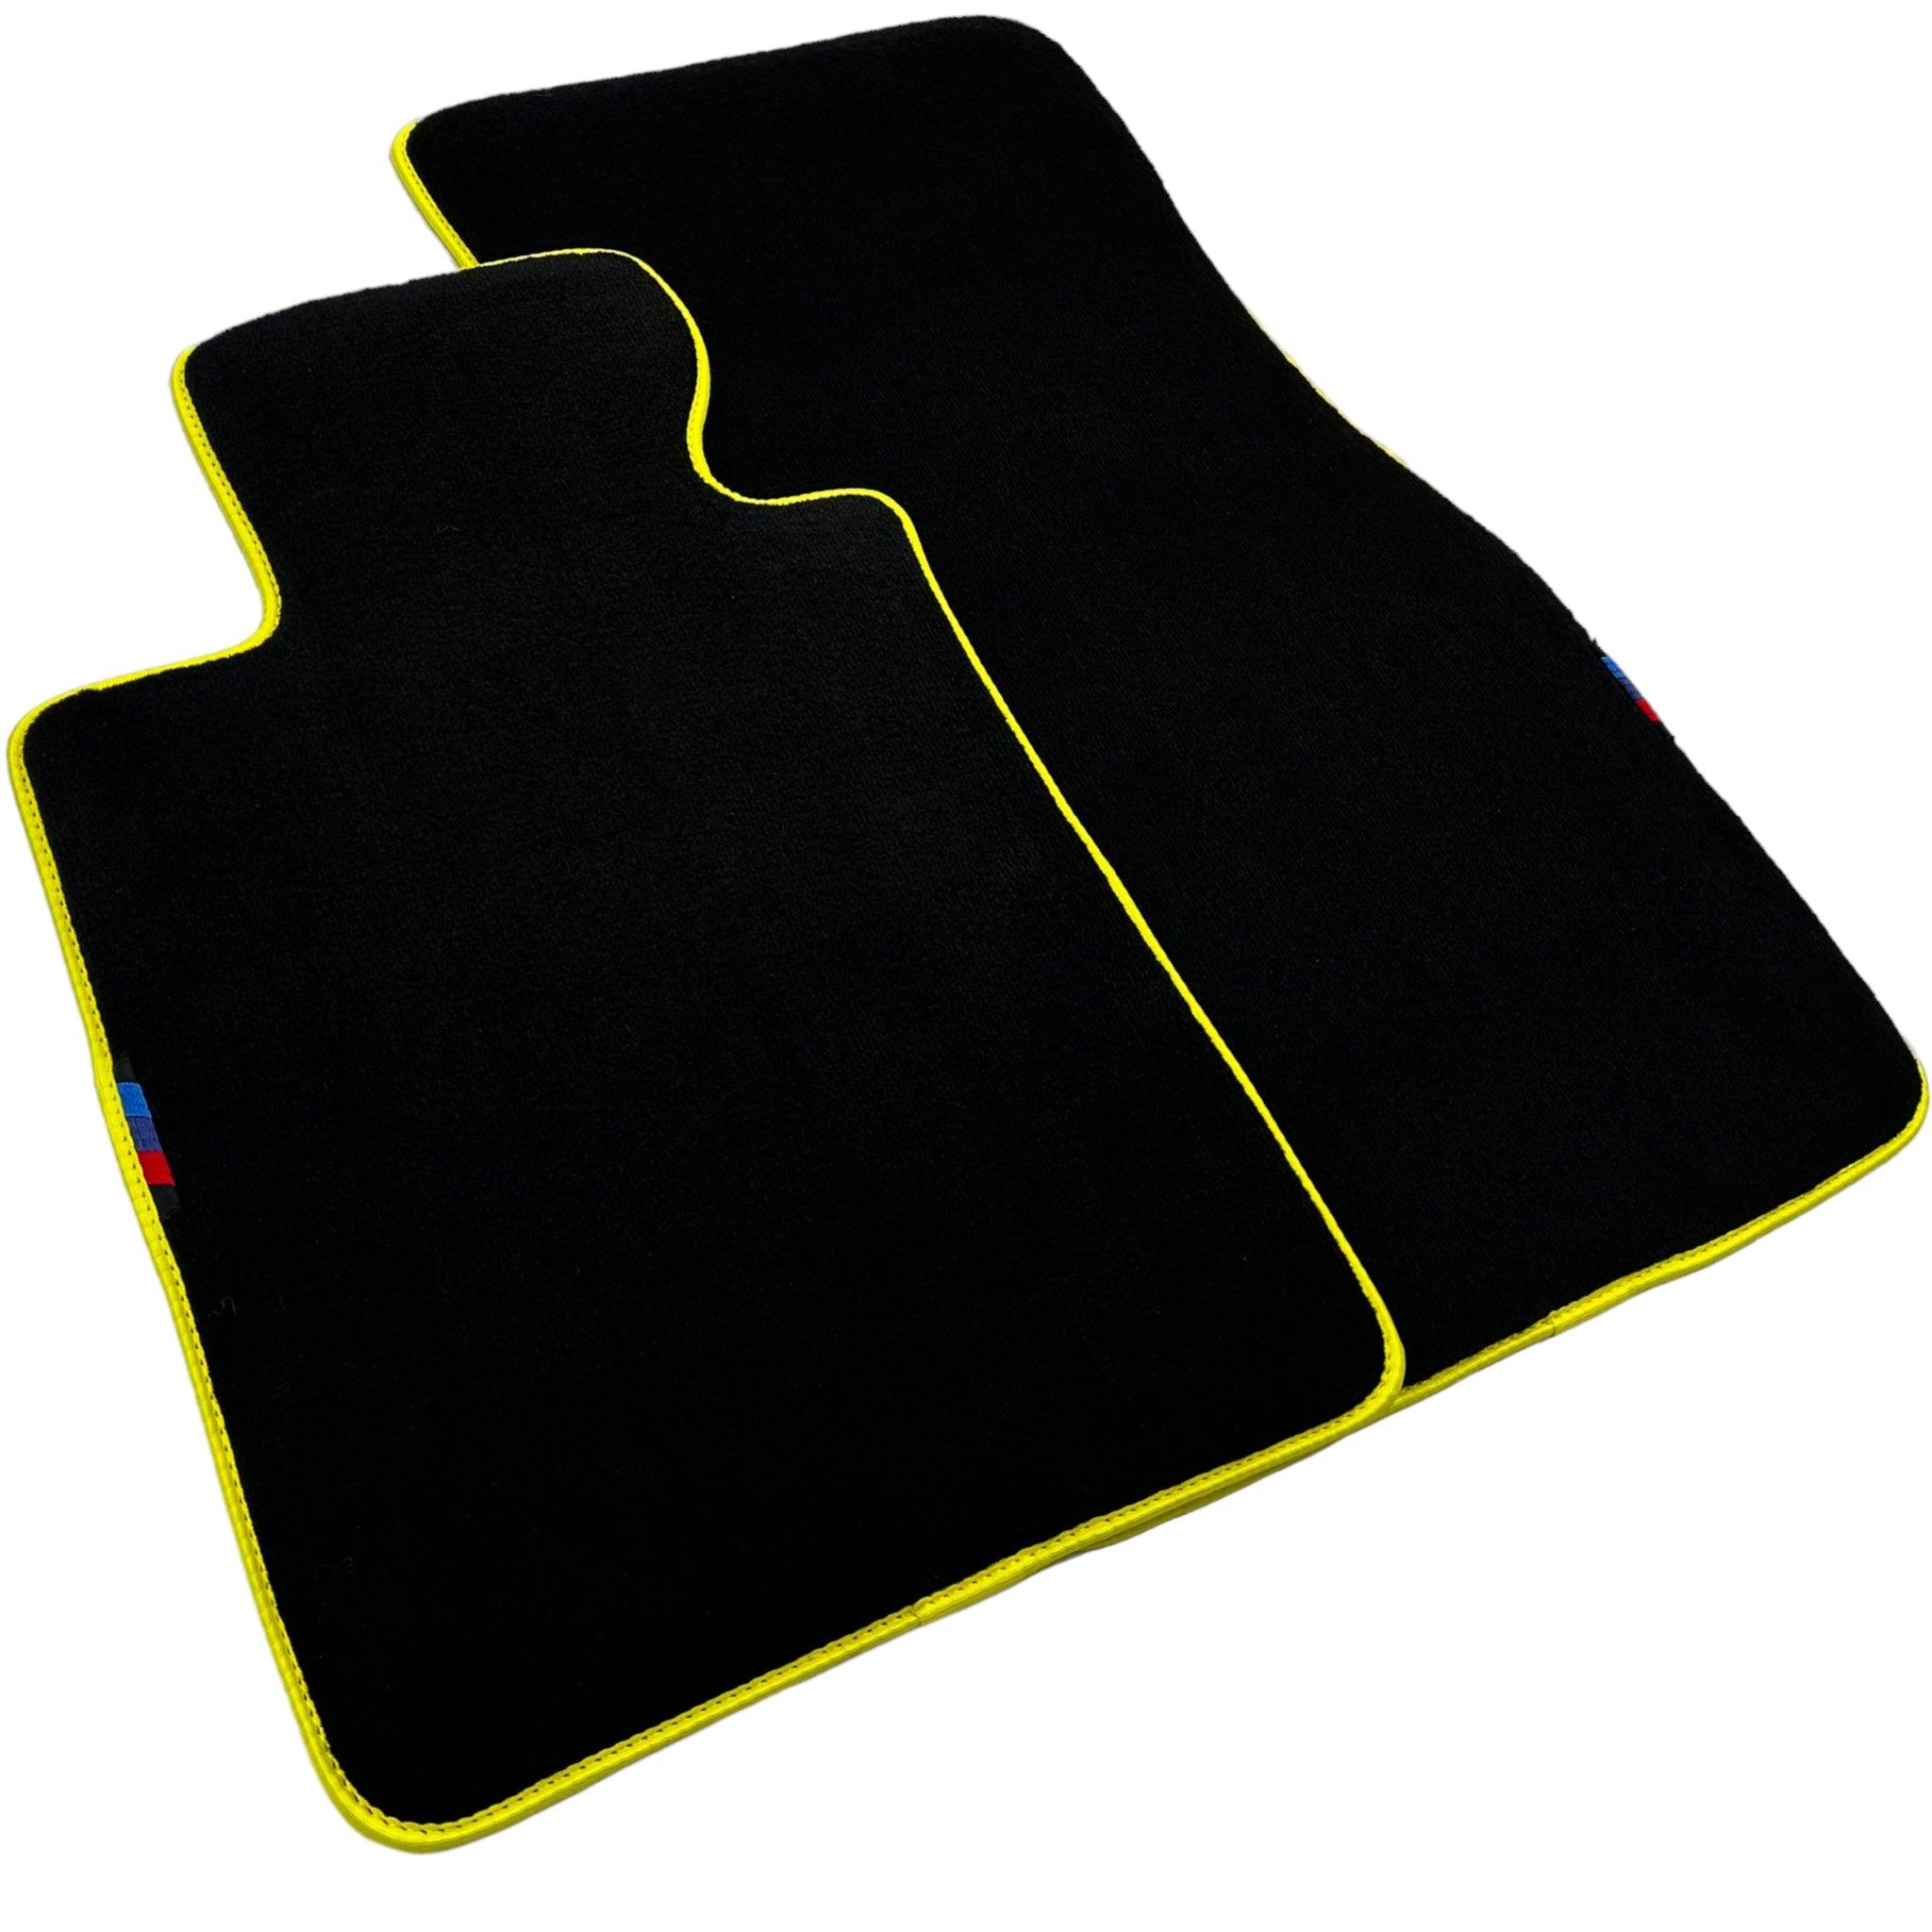 Black Floor Mats For BMW 3 Series E36 2-door Coupe | Fighter Jet Edition | Yellow Trim